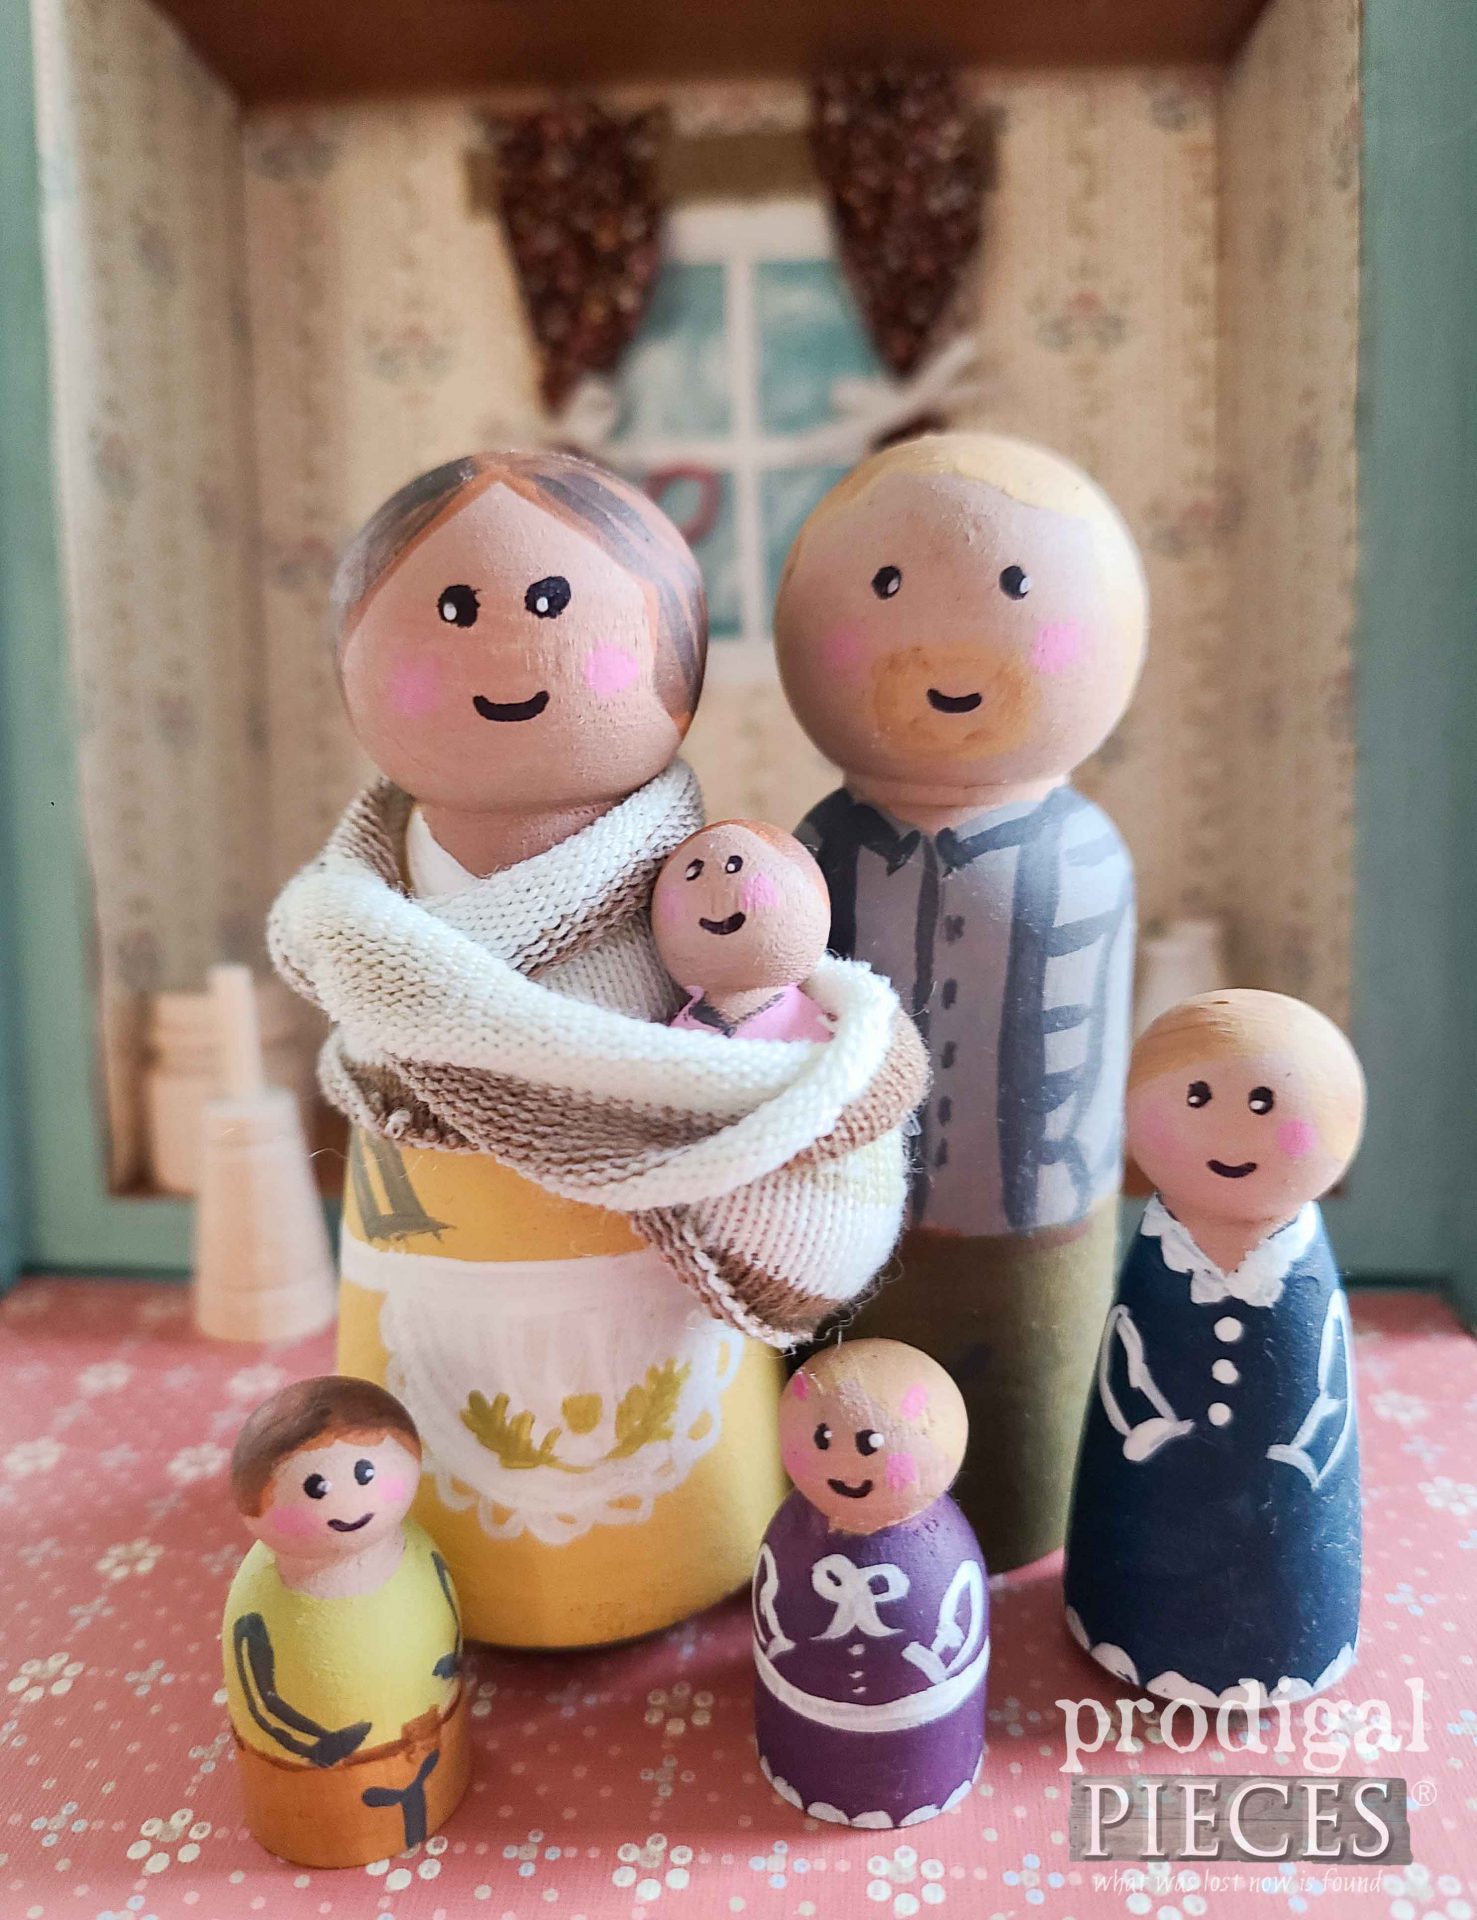 Hand-Painted Peg Doll Family for DIY Travel Dollhouse from Upcycled Cigar Box by Larissa of Prodigal Pieces | prodigalpieces.com #prodigalpieces #diy #toys #kids #gift #travel